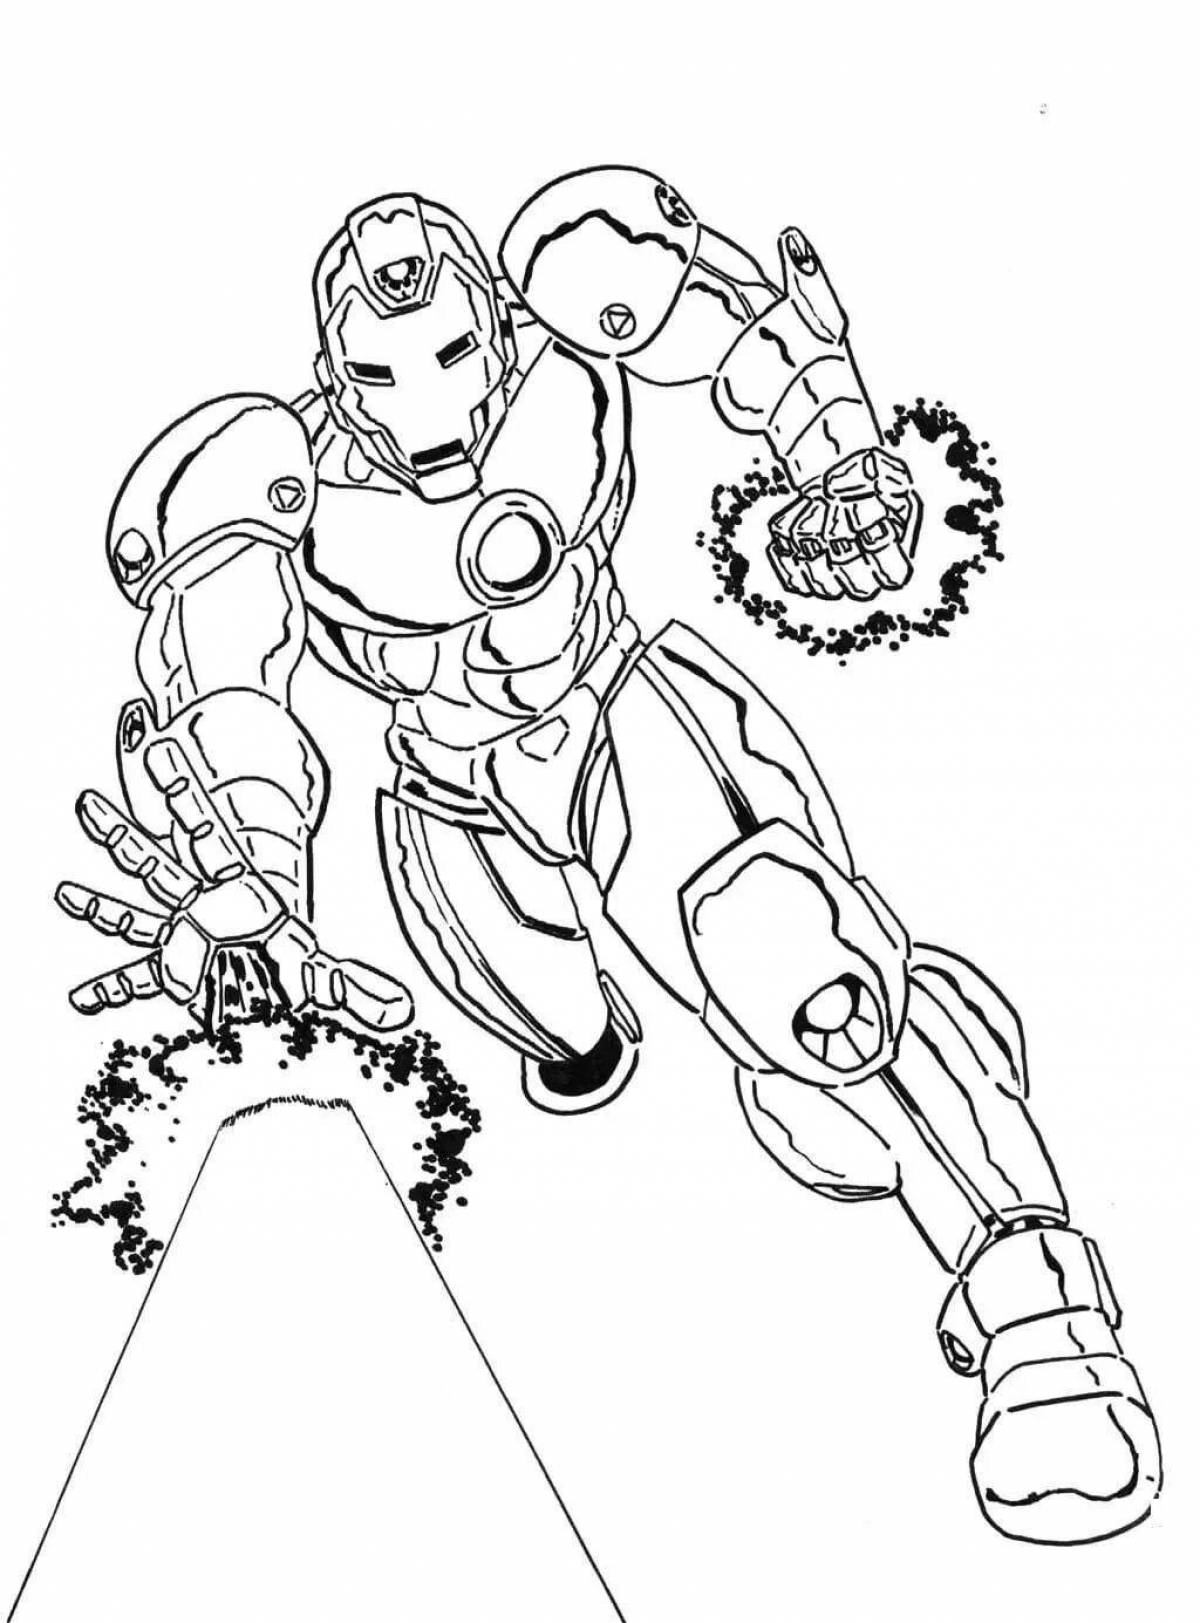 Awesome iron man coloring book